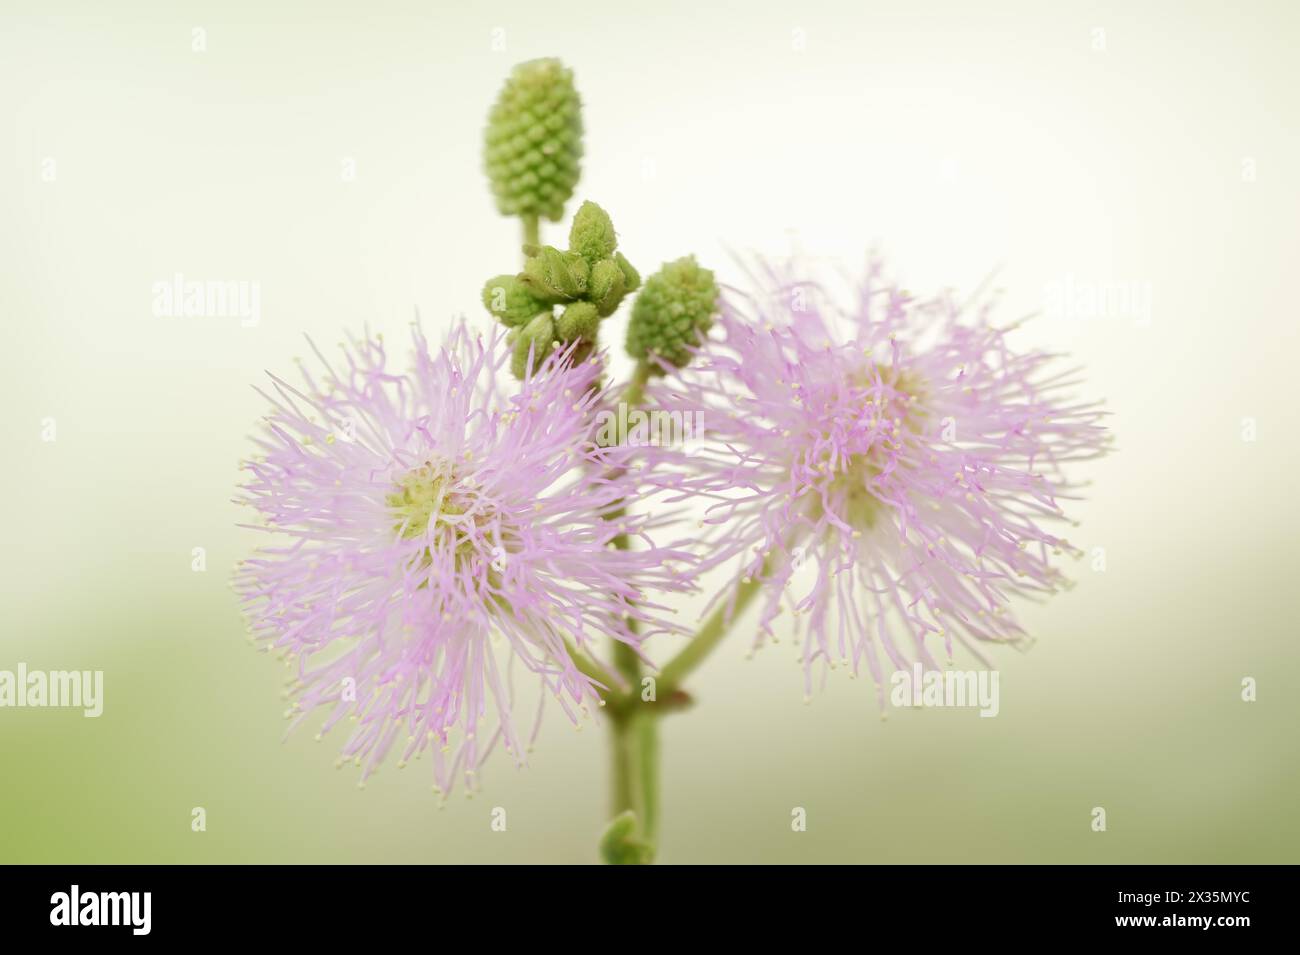 Mimosa or shameful sense plant (Mimosa pudica), flowers, native to South America Stock Photo